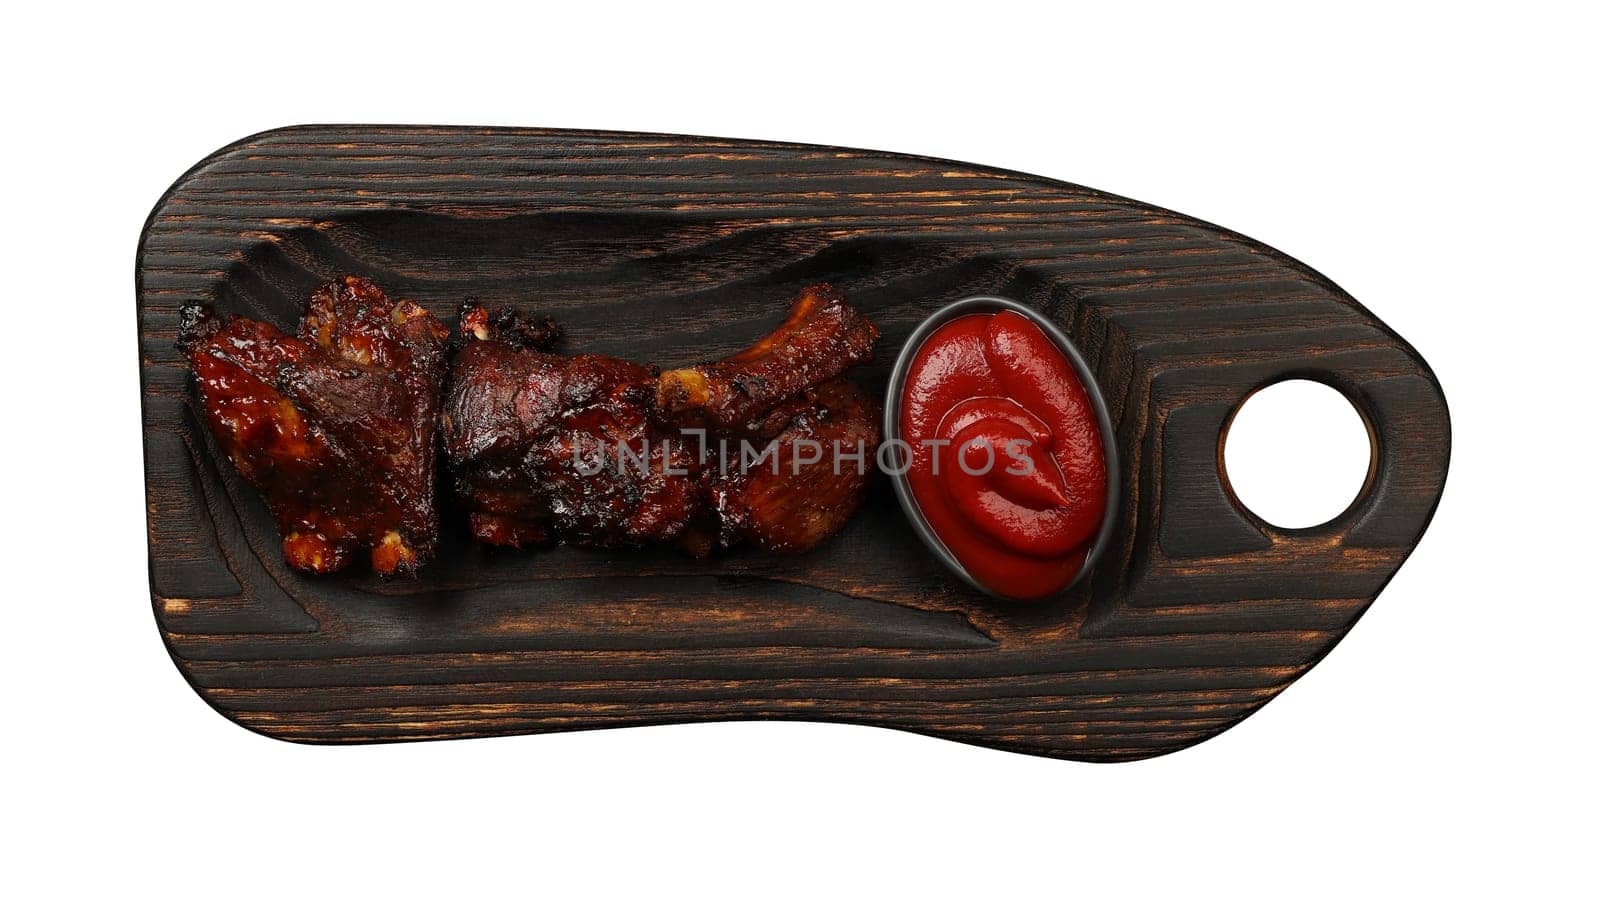 Barbecue spare ribs and BBQ sauce on wooden board by BreakingTheWalls